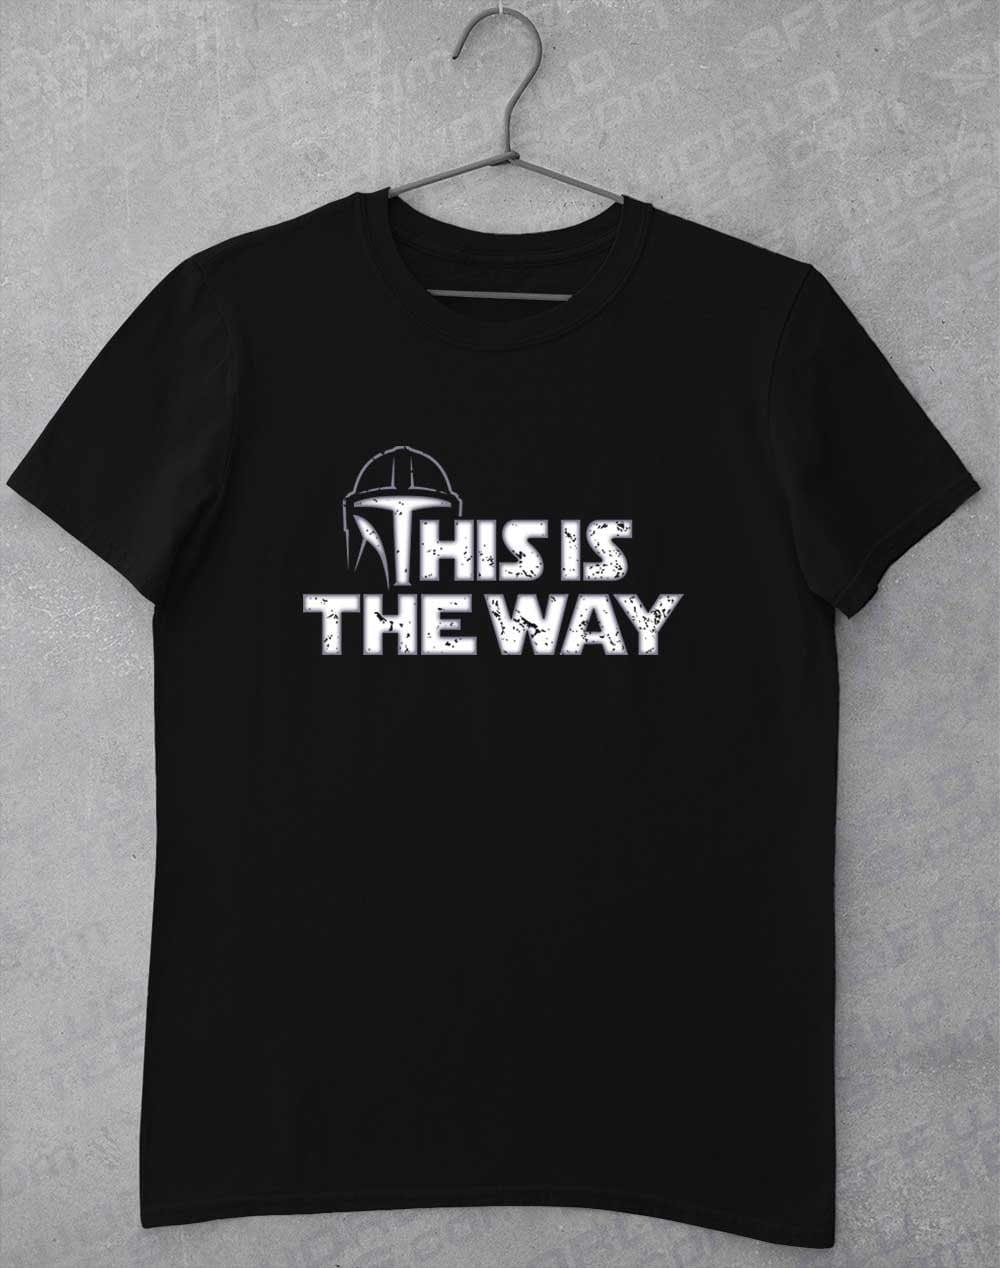 This is the Way - T-Shirt S / Black  - Off World Tees